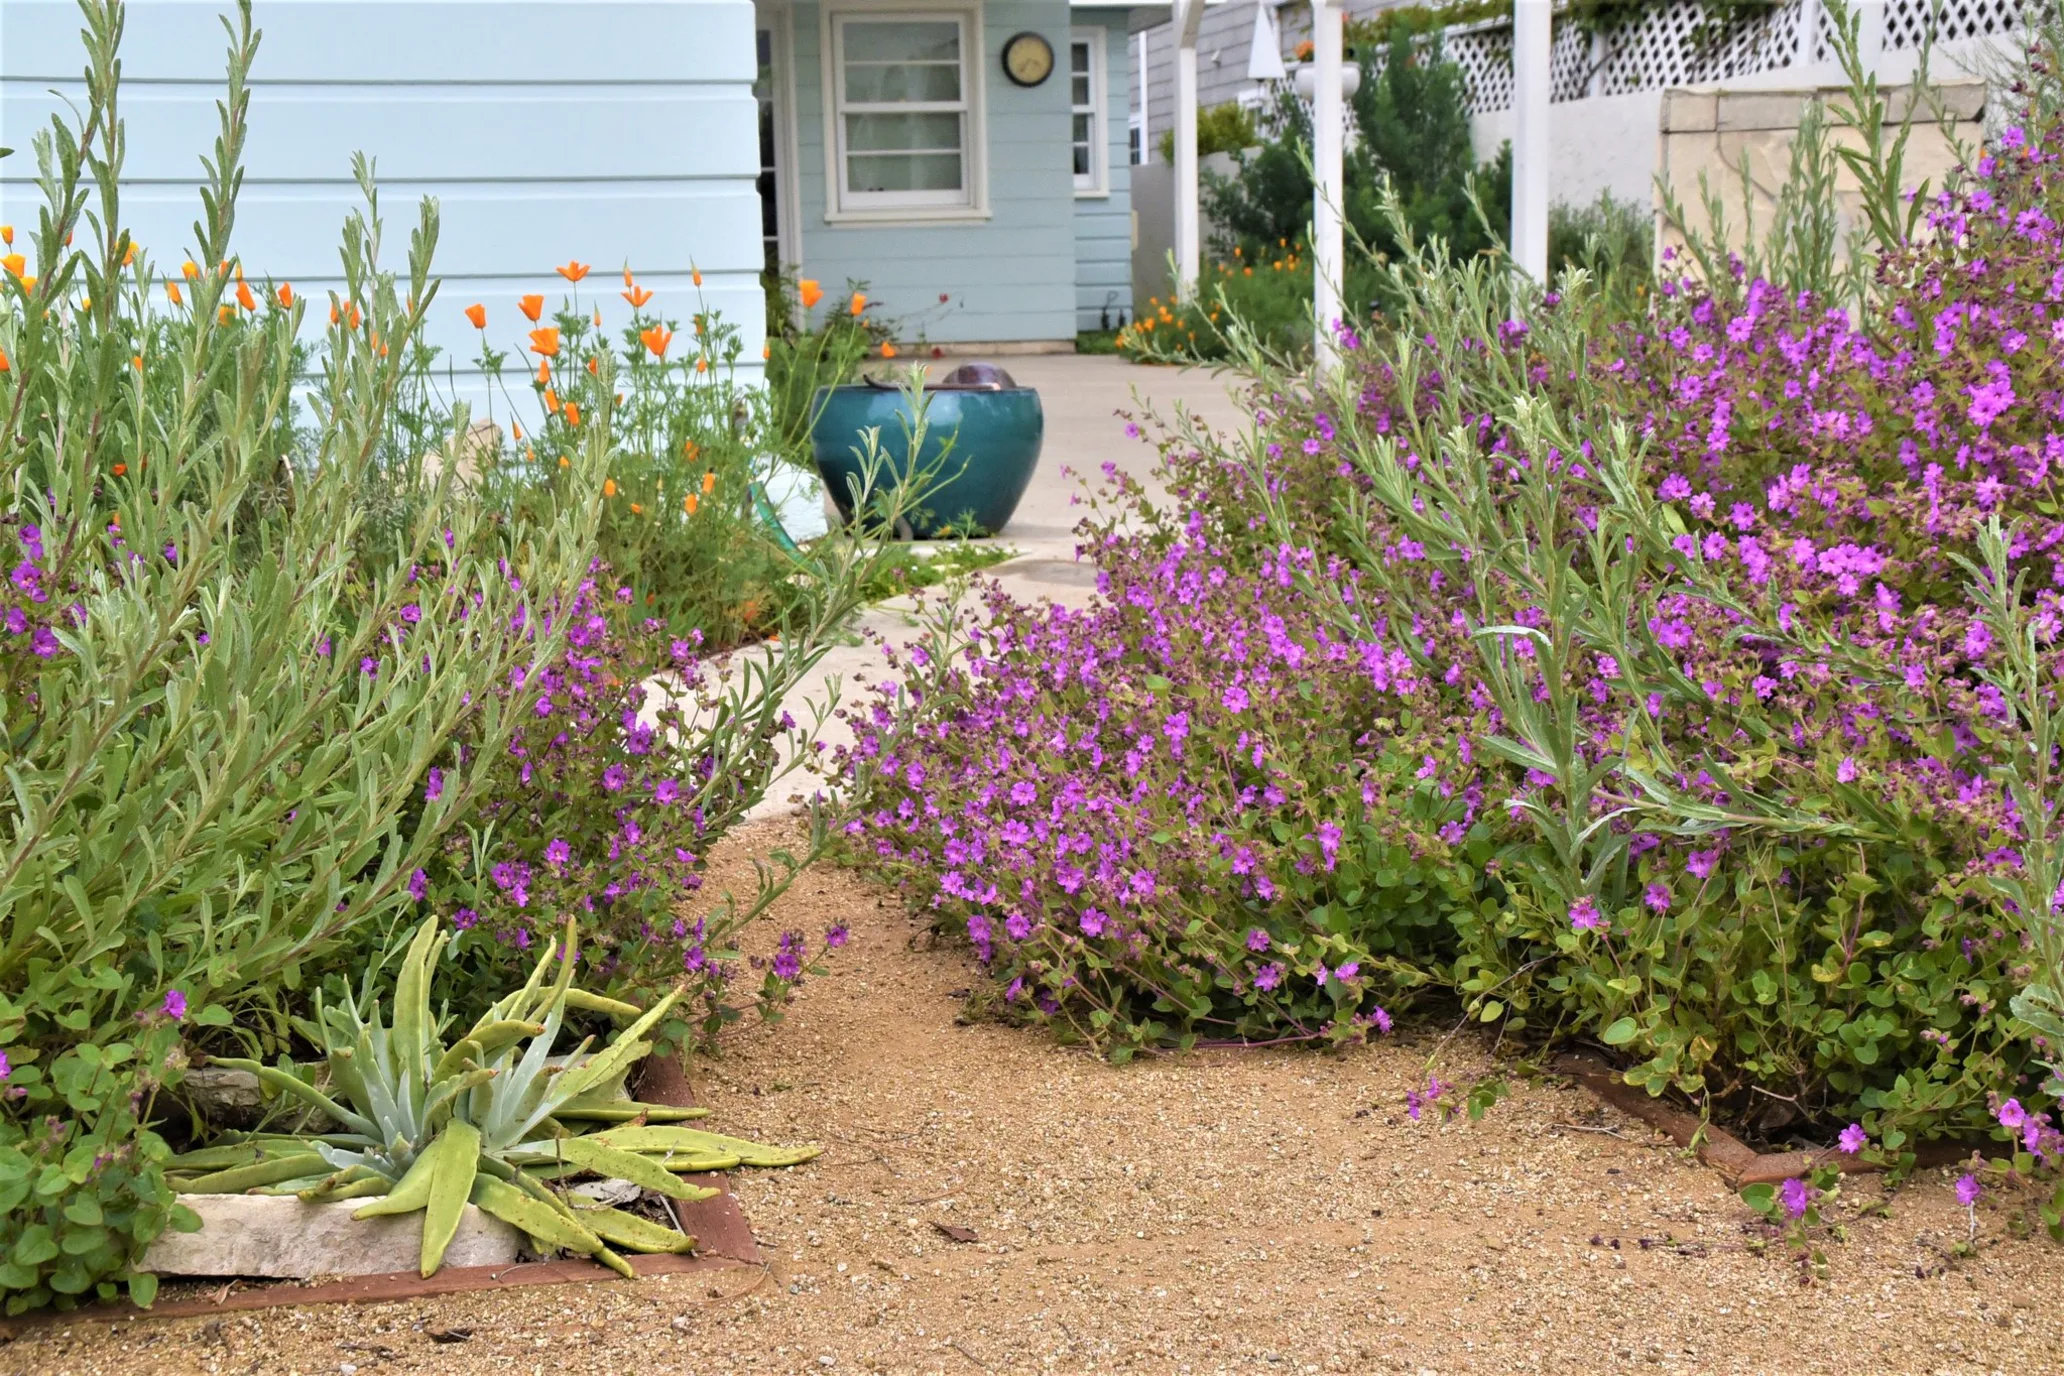 A backyard landscaped with native wildflowers. PHOTO BY CALIFORNIA NATIVE PLANT SOCIETY